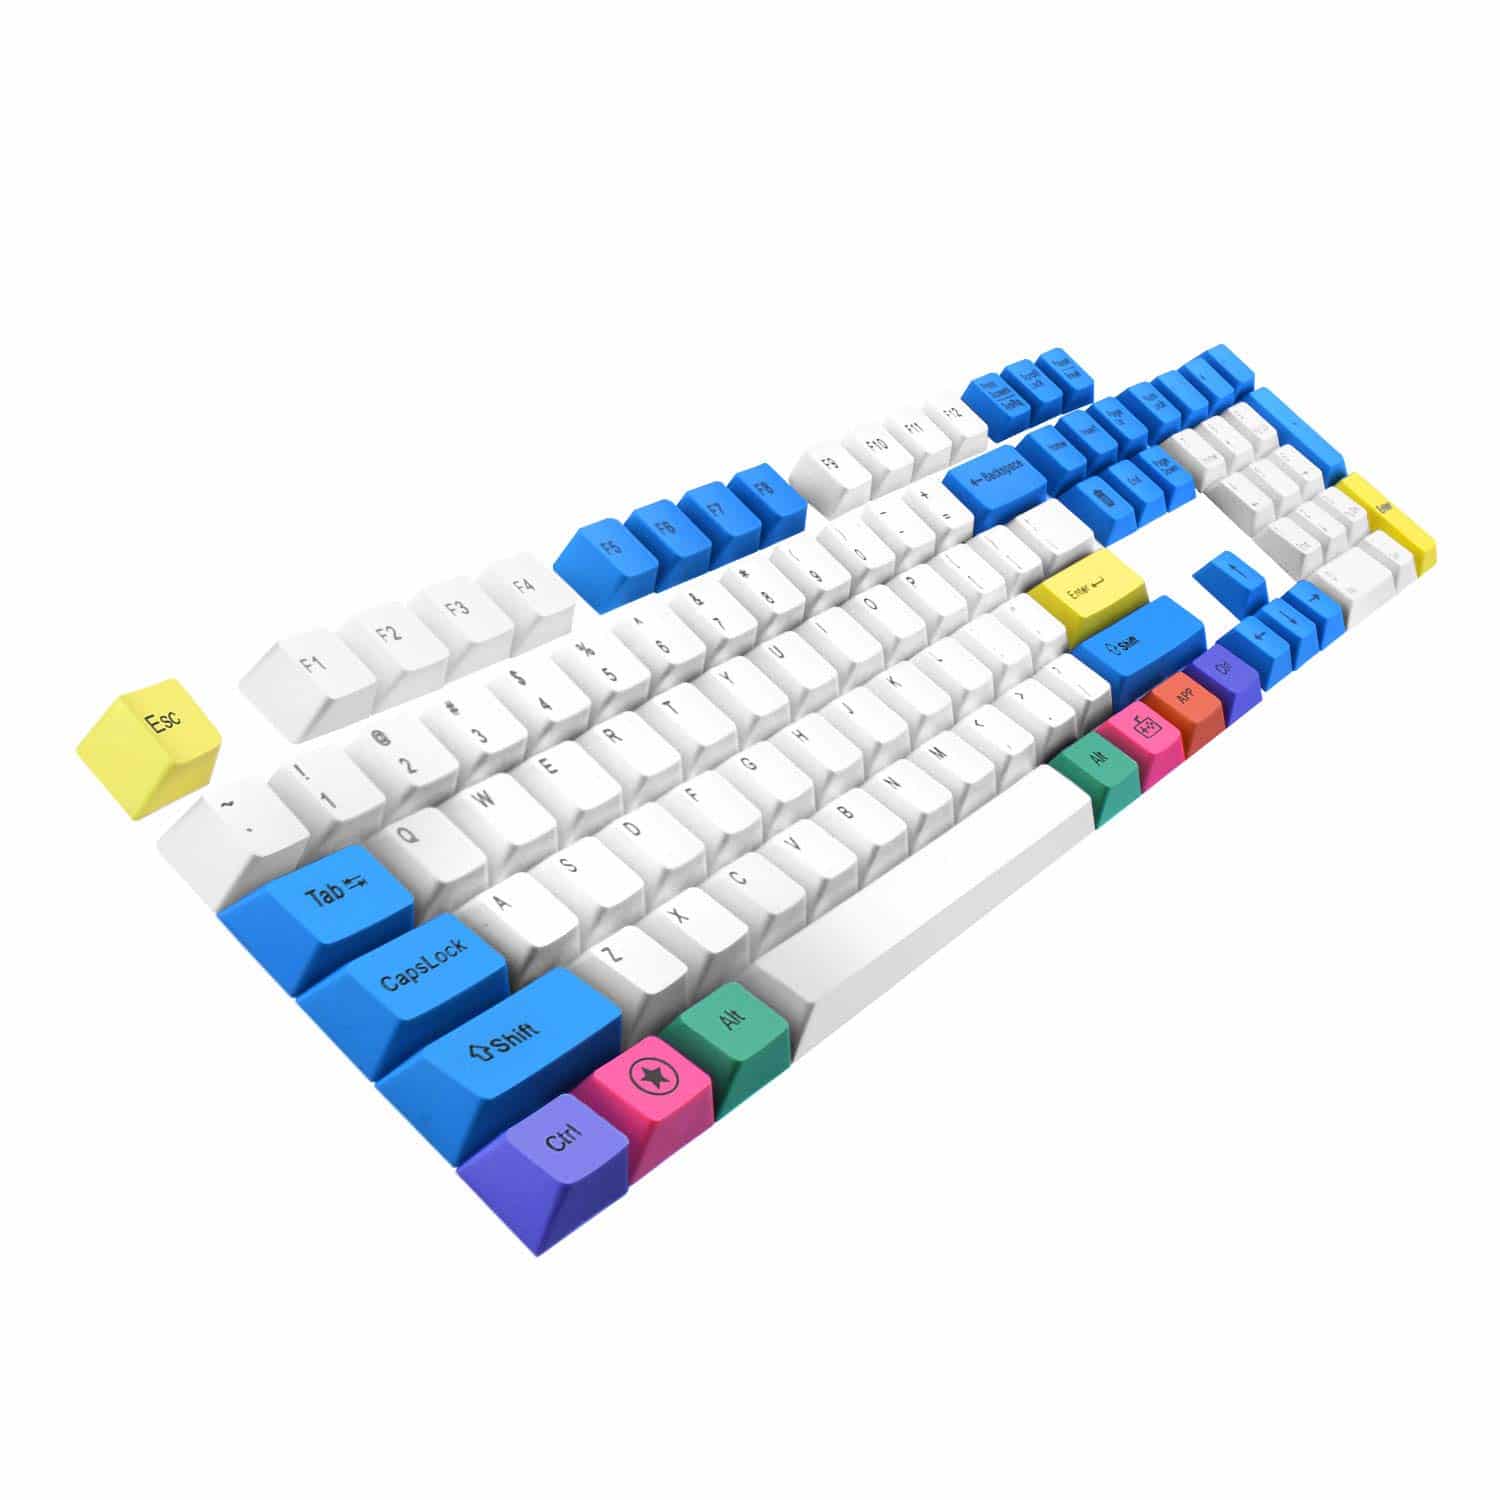 HAVIT KC25 PBT Keycaps 104 Keys with Puller for Cherry MX Mechanical Keyboard (White & Blue &Yellow)